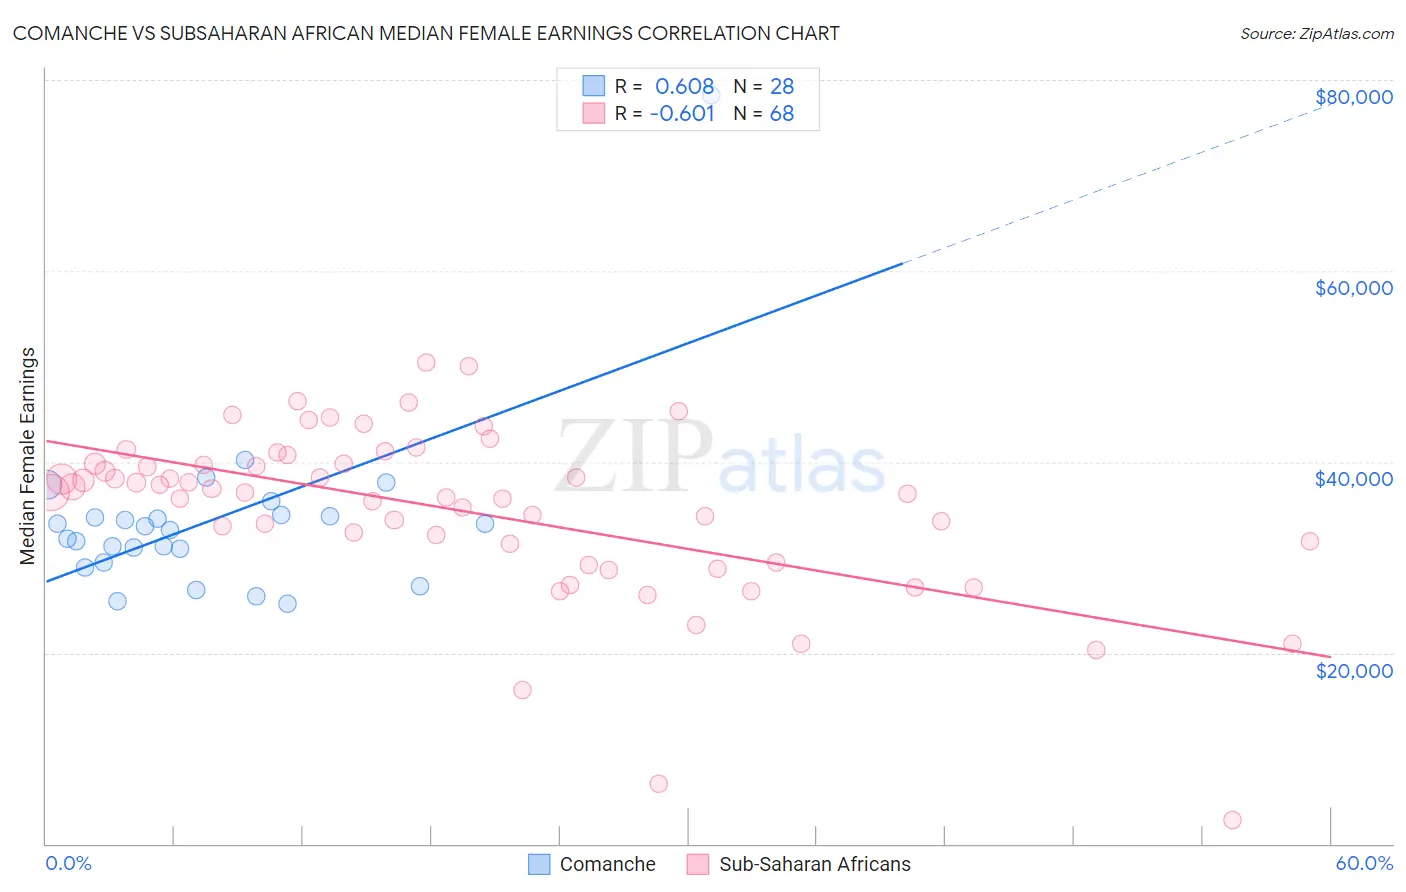 Comanche vs Subsaharan African Median Female Earnings